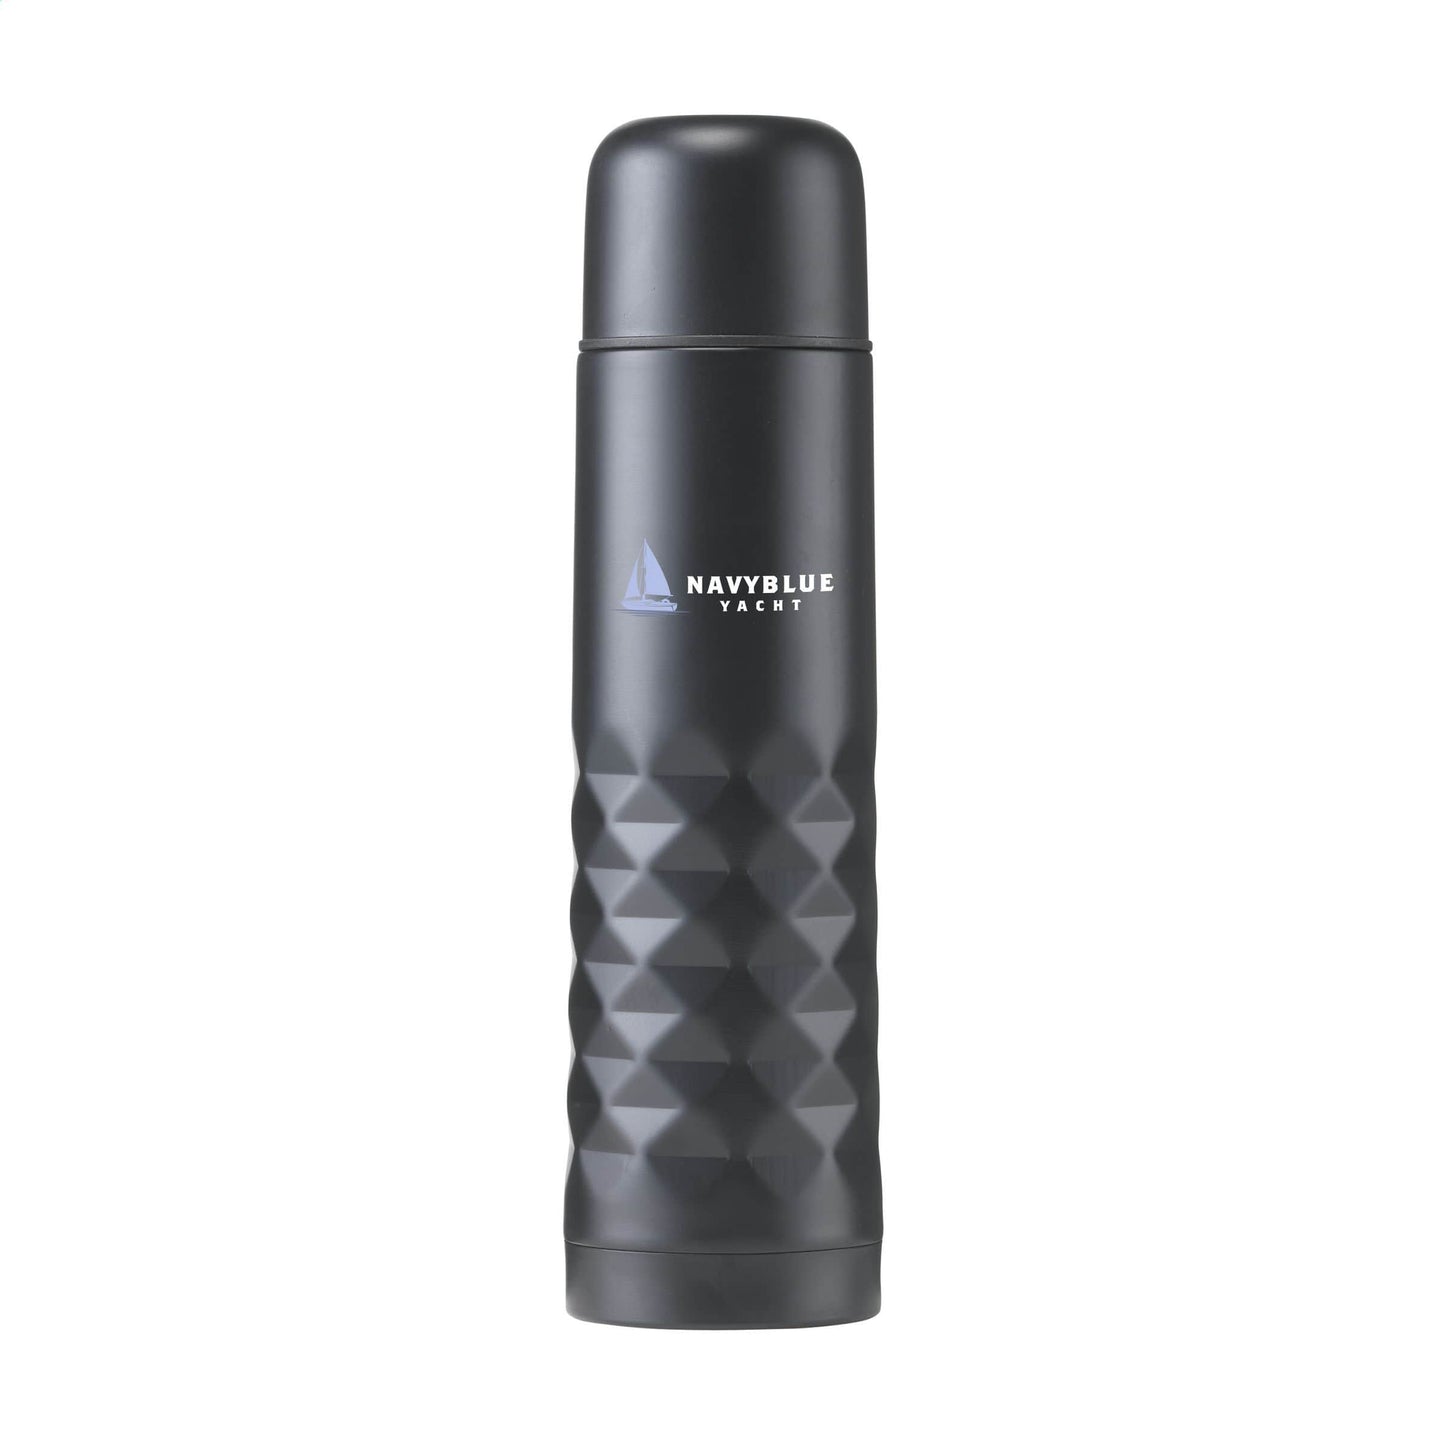 Graphic Thermo Bottle 500 ml Thermoflasche - WERBE-WELT.SHOP